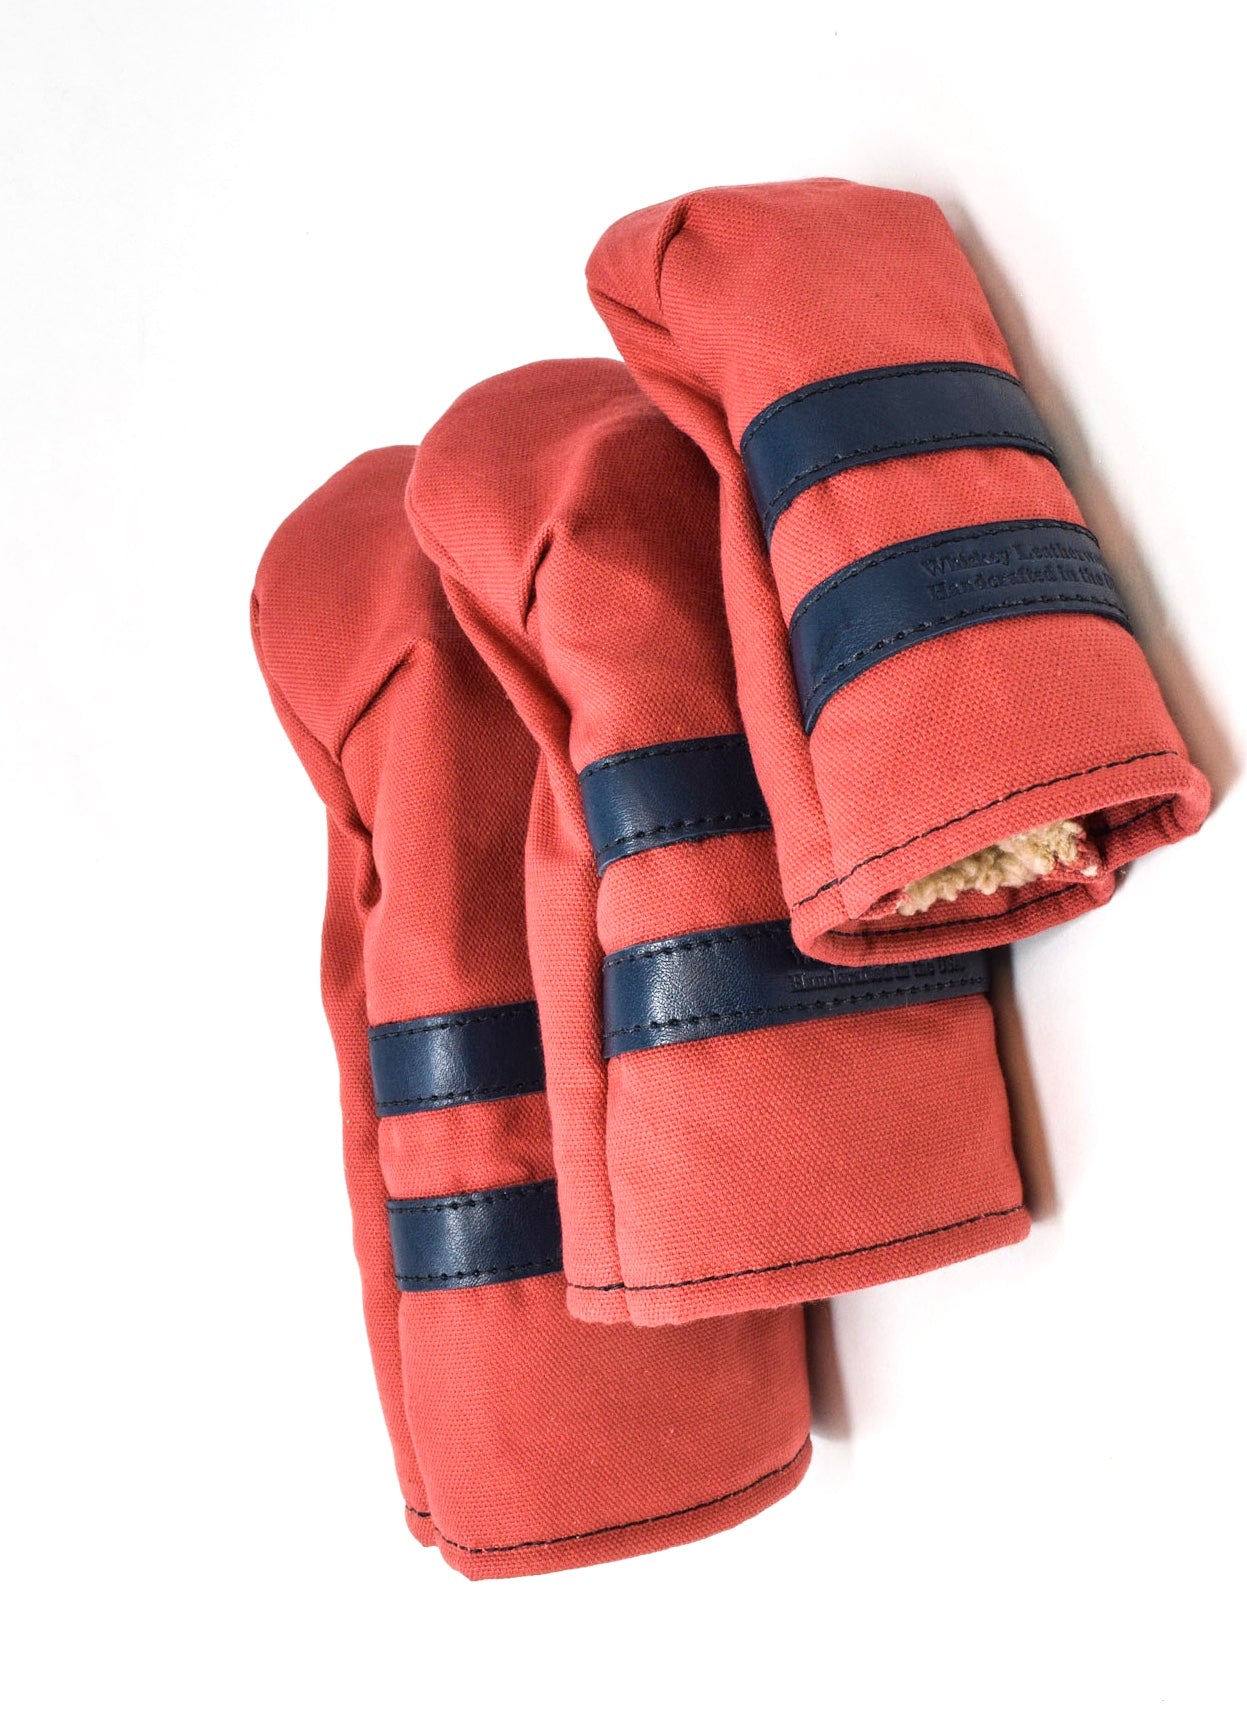 The Whiskey Head Cover Set - Nantucket Red